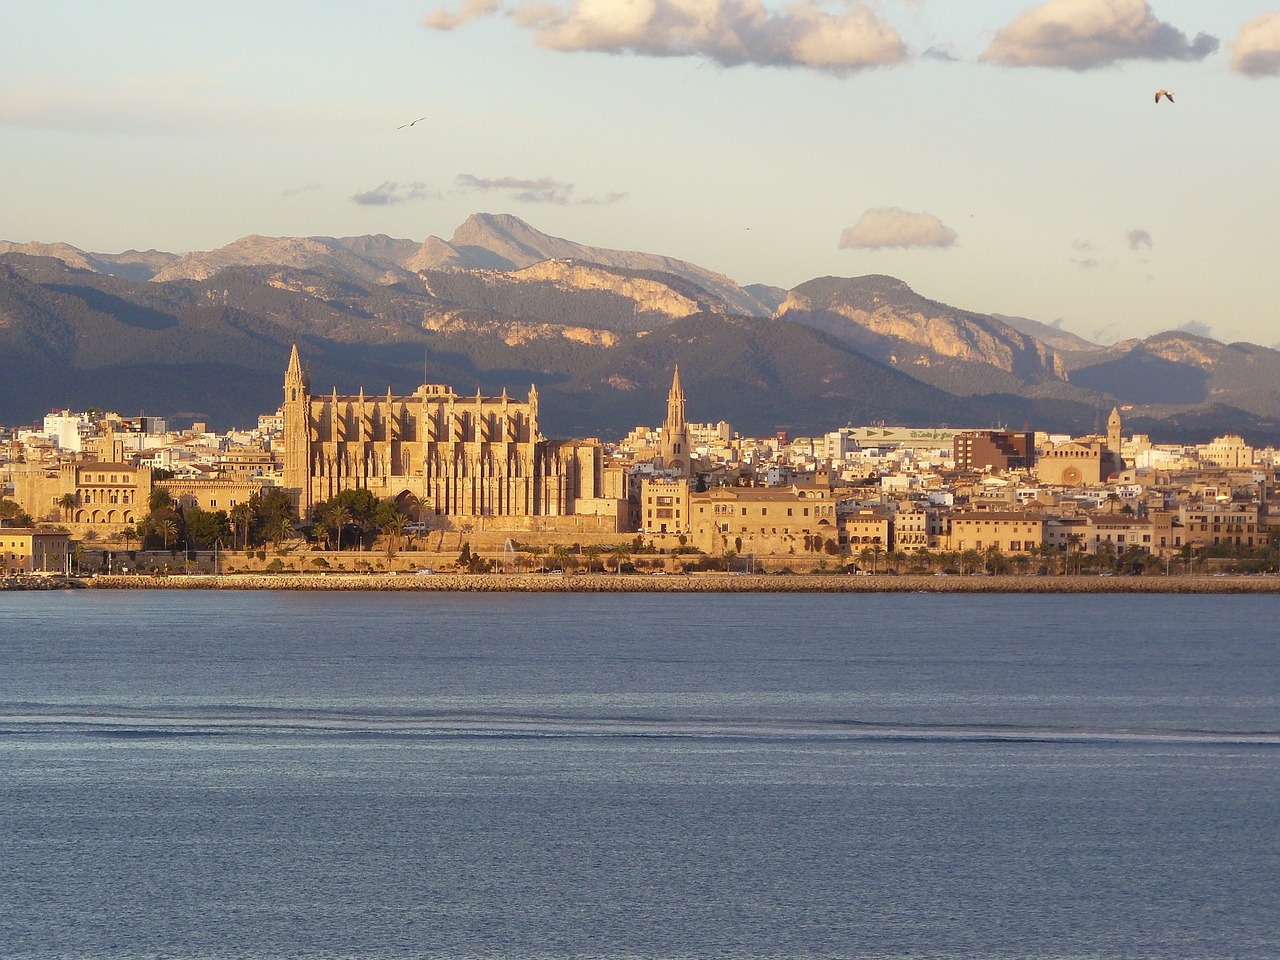 3-Day Relaxation and Exploration in Palma de Mallorca